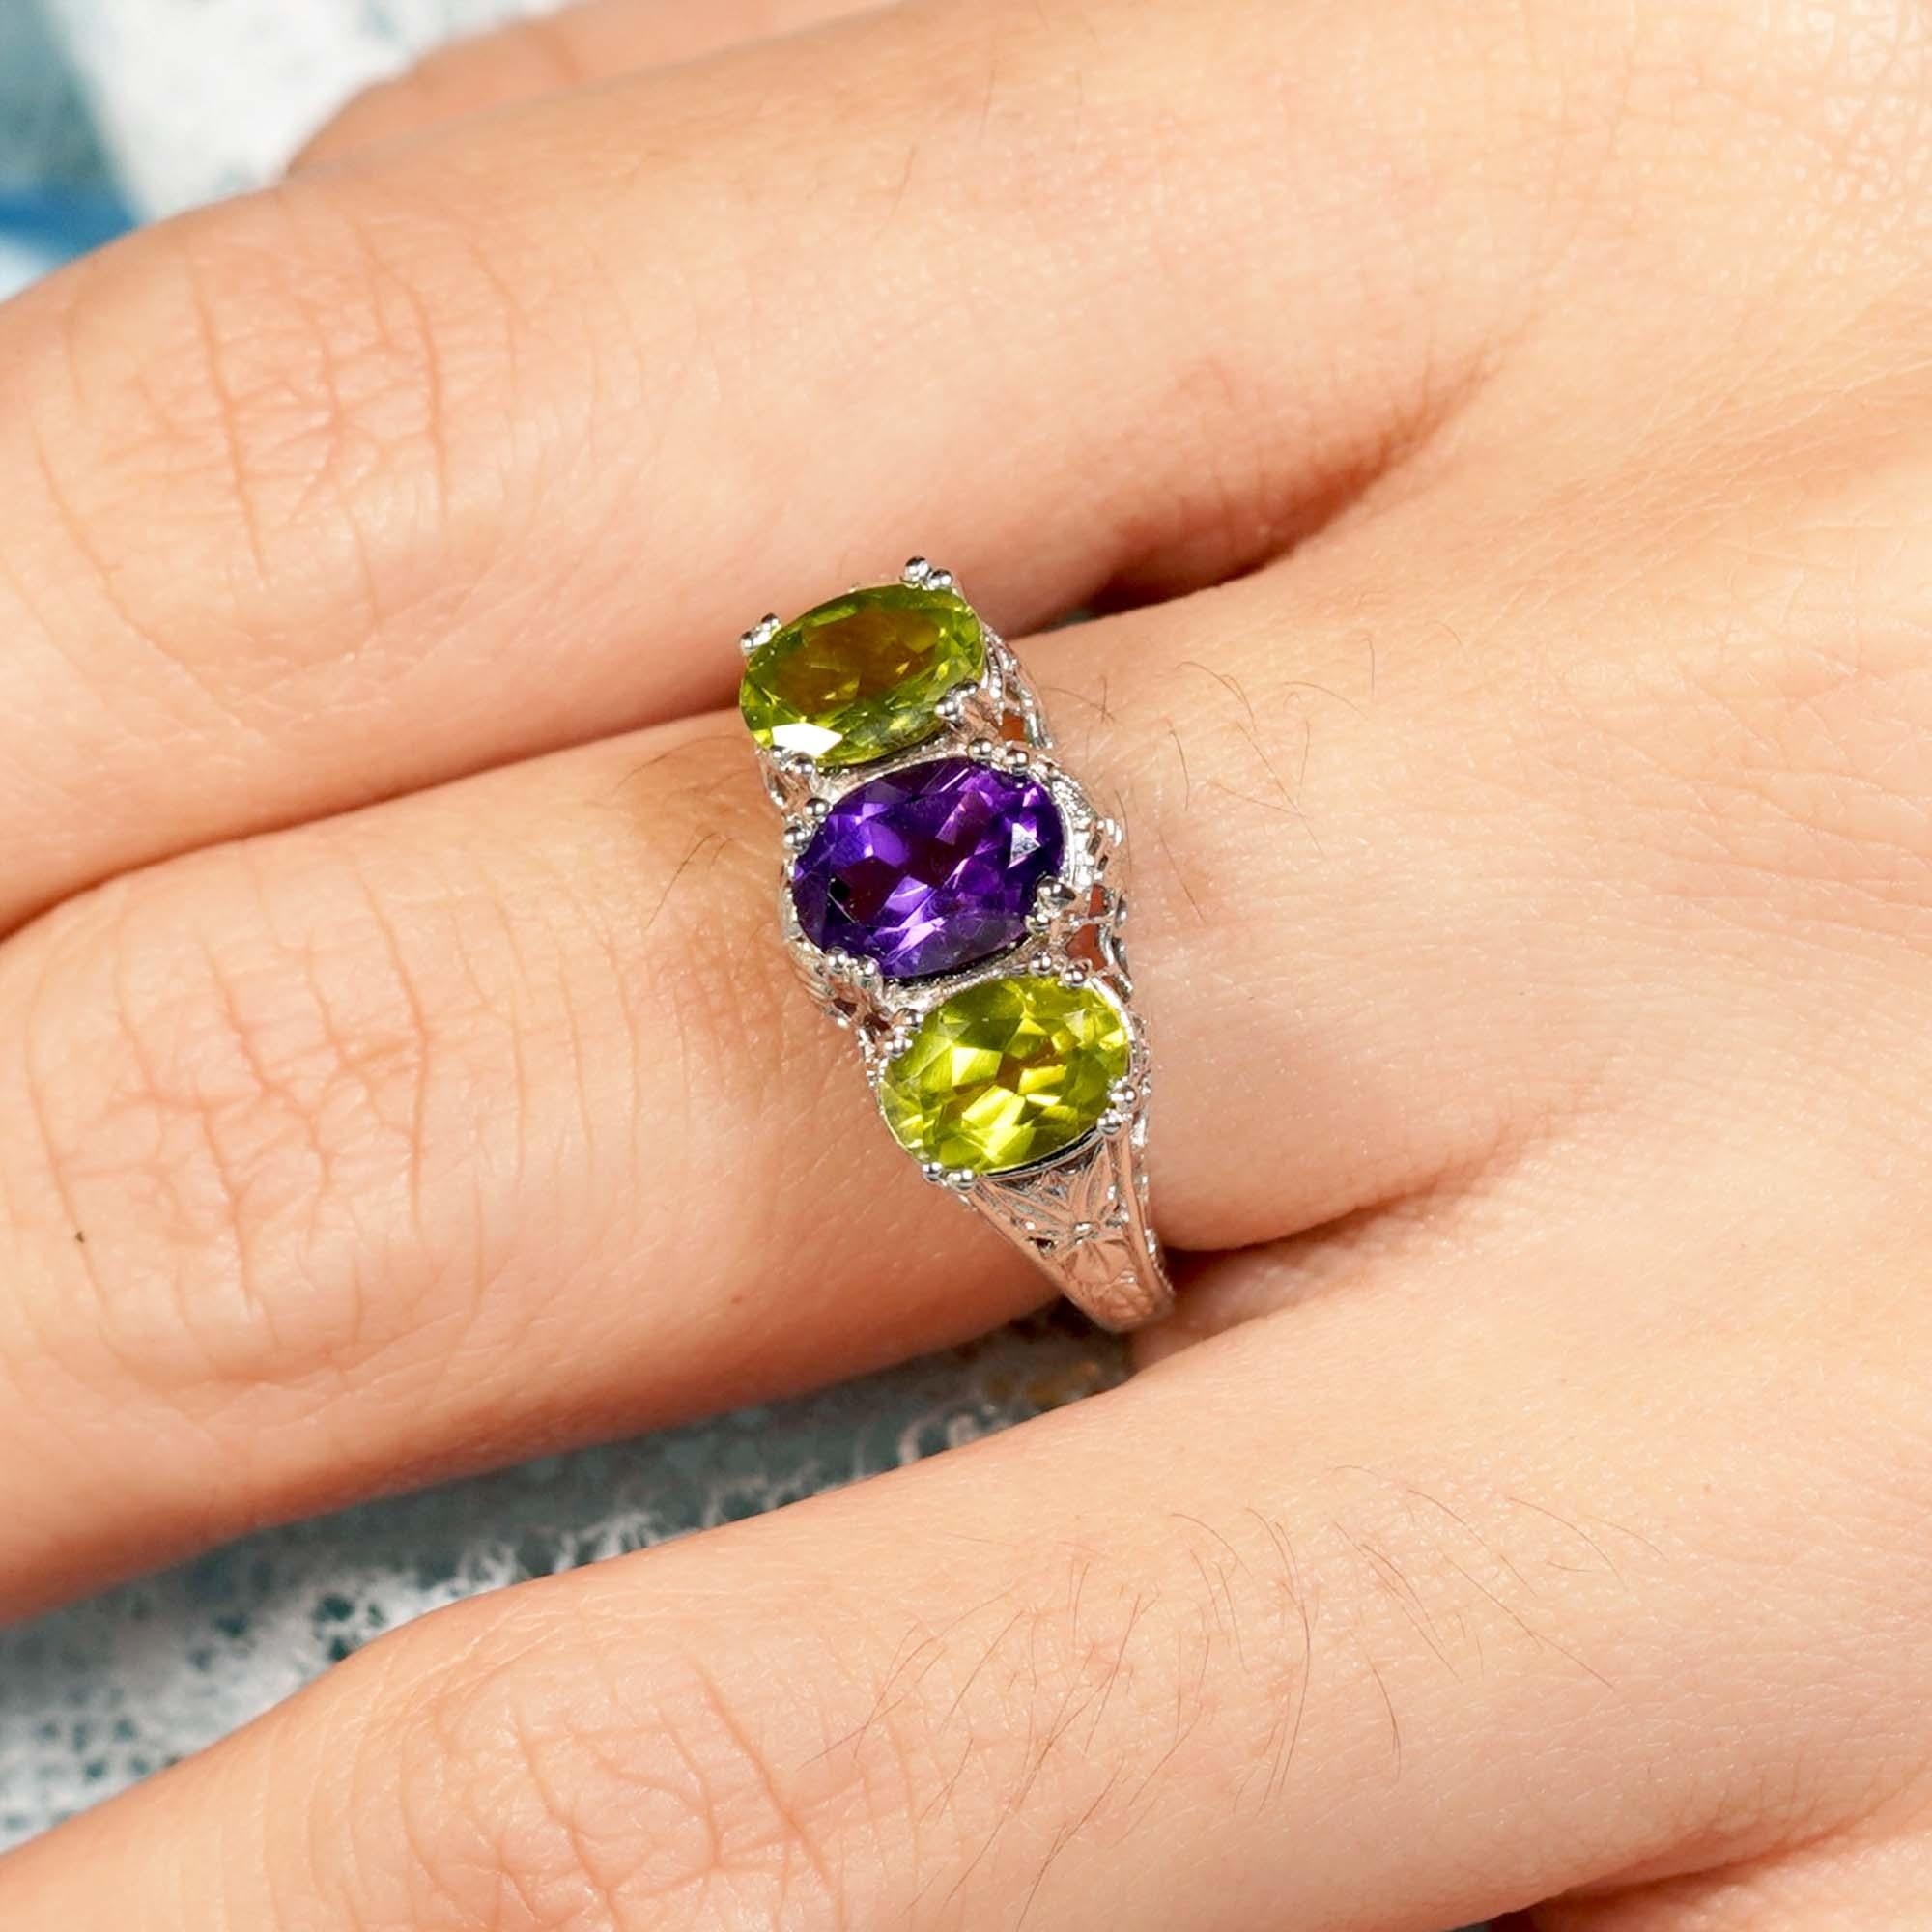 For Sale:  Natural Amethyst Peridot Vintage Style Filigree Three Stone Ring in 9K Gold 8